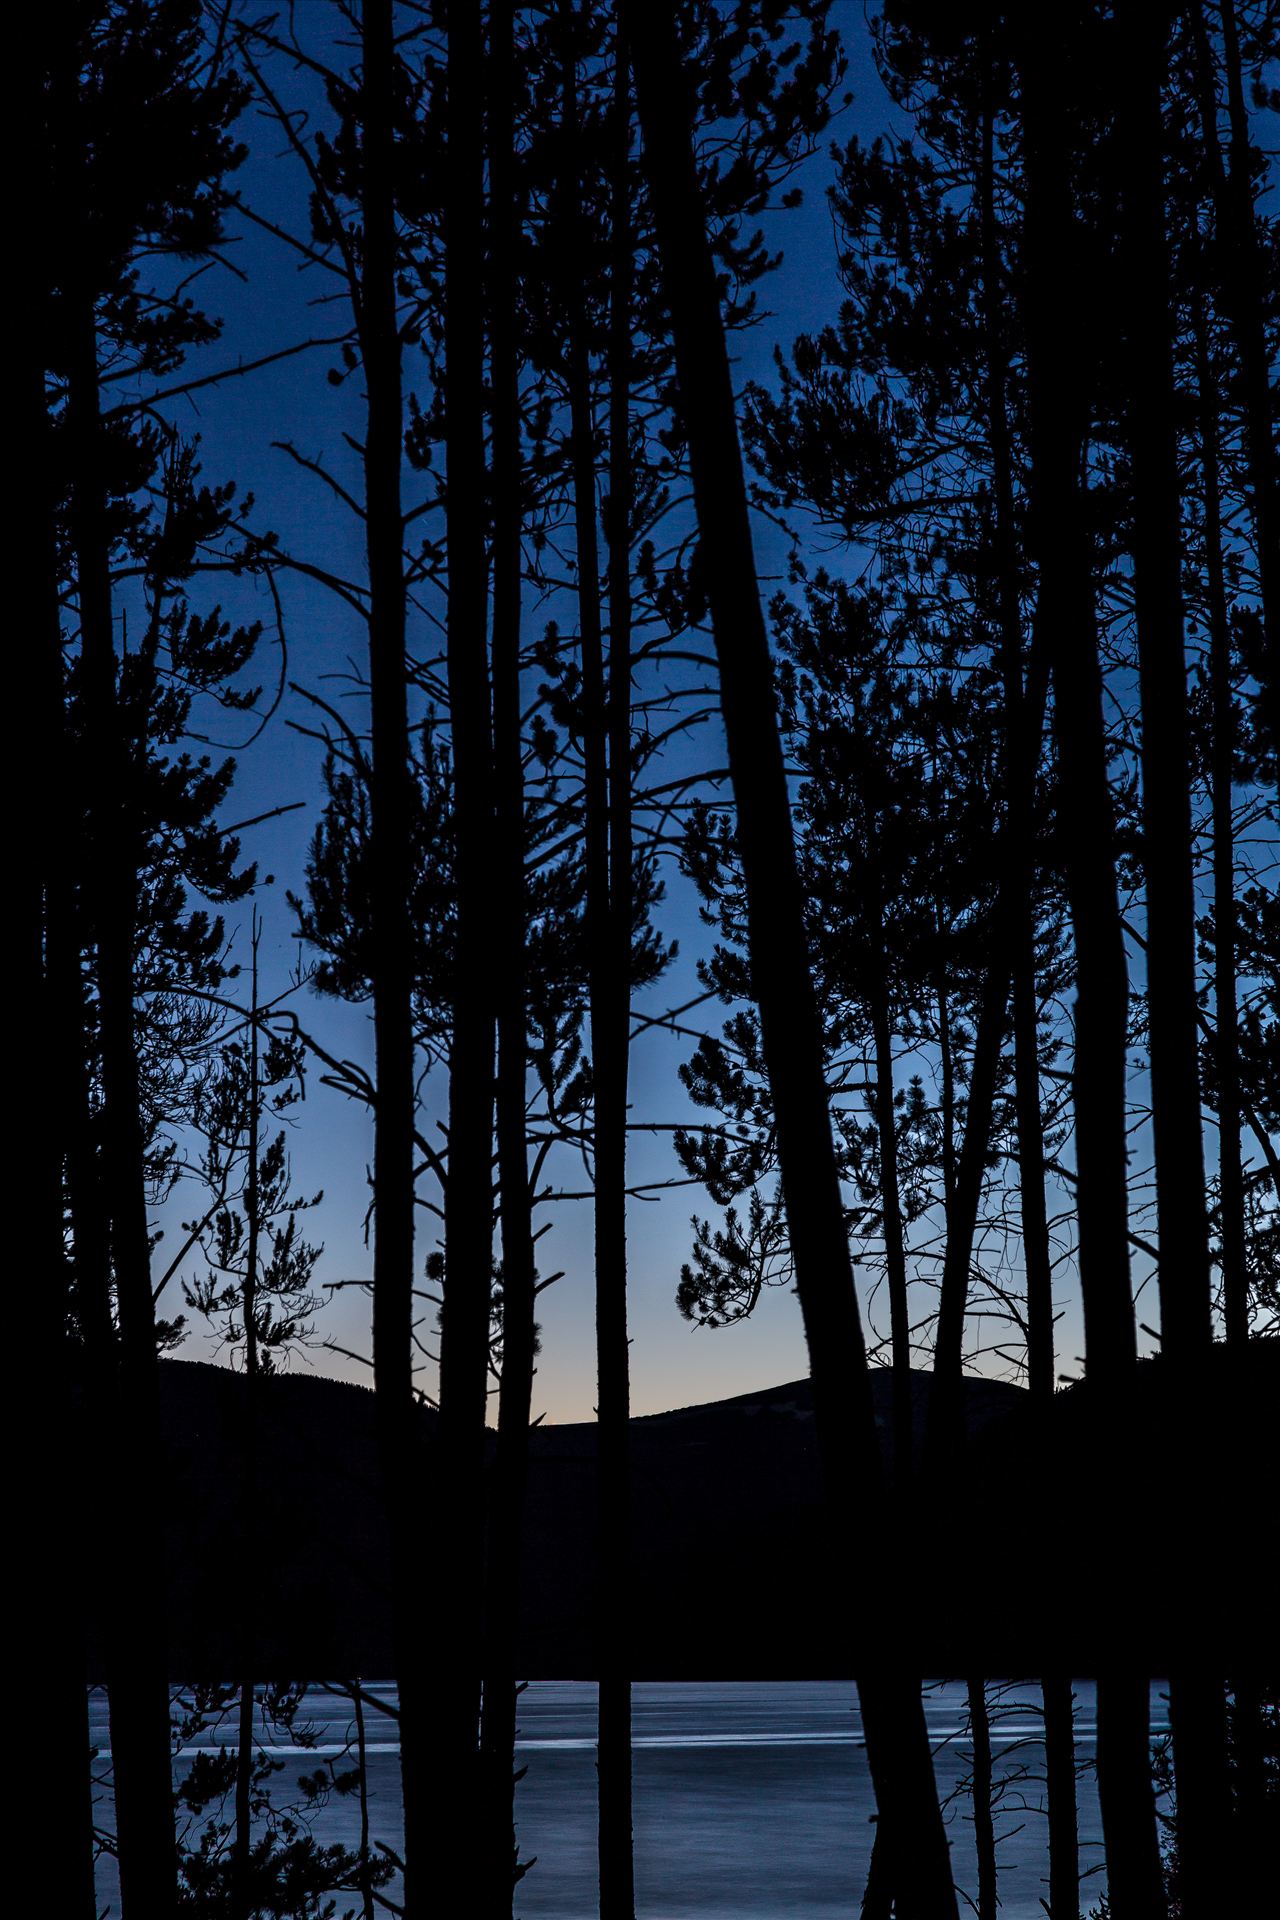 Through the Woods - Turqouise through the trees, Lake lit by the last of the sunlight, as seen from our campsite. by Scott Smith Photos